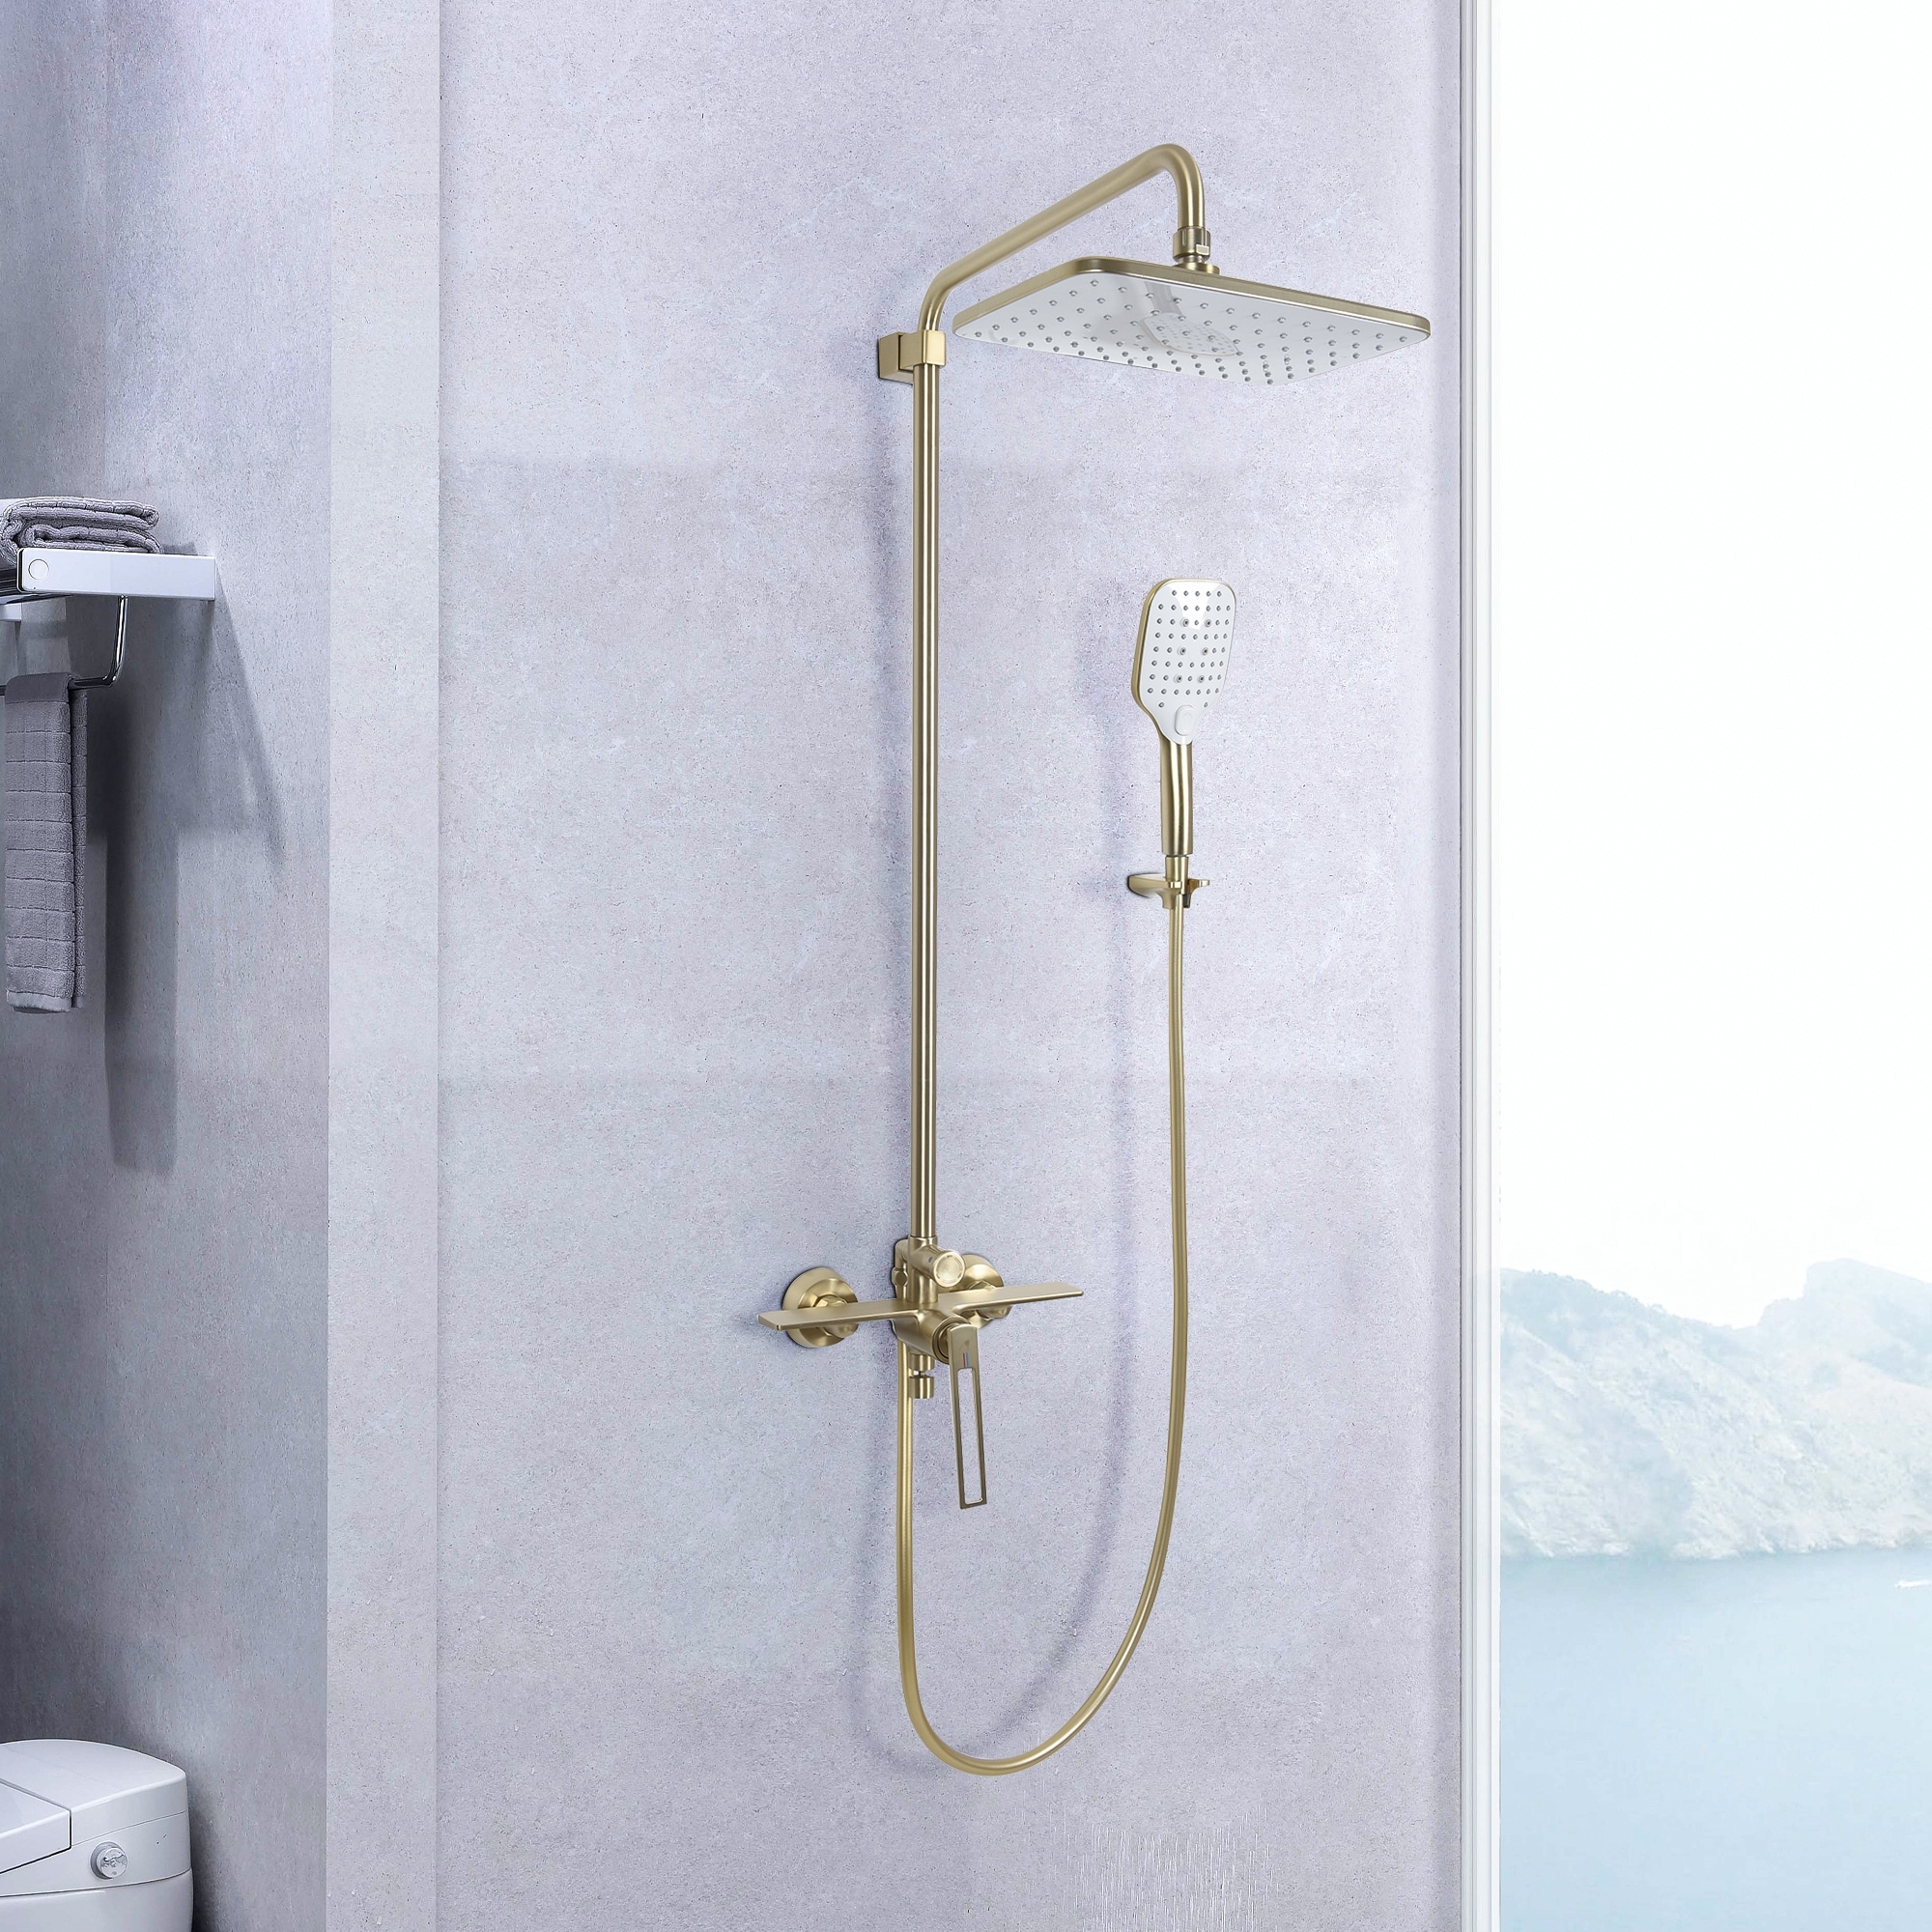 https://ak1.ostkcdn.com/images/products/is/images/direct/6d35becb696efad5882e294309d267aa784bf998/Wall-Mounted-Complete-Shower-System-with-Rough-In-Valve.jpg